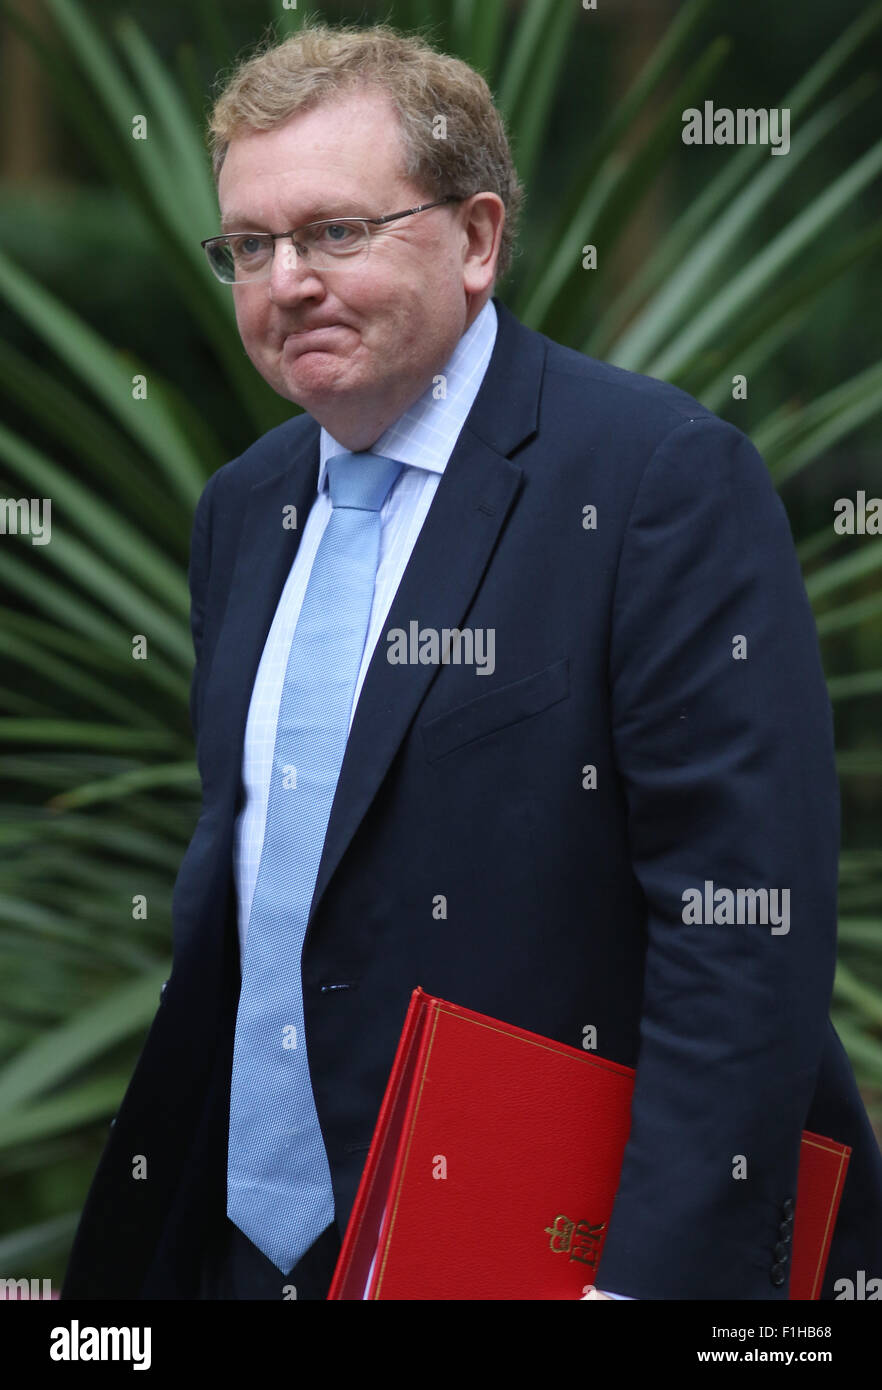 London, UK, 14th July 2015: David Mundell seen at Downing Street in London Stock Photo